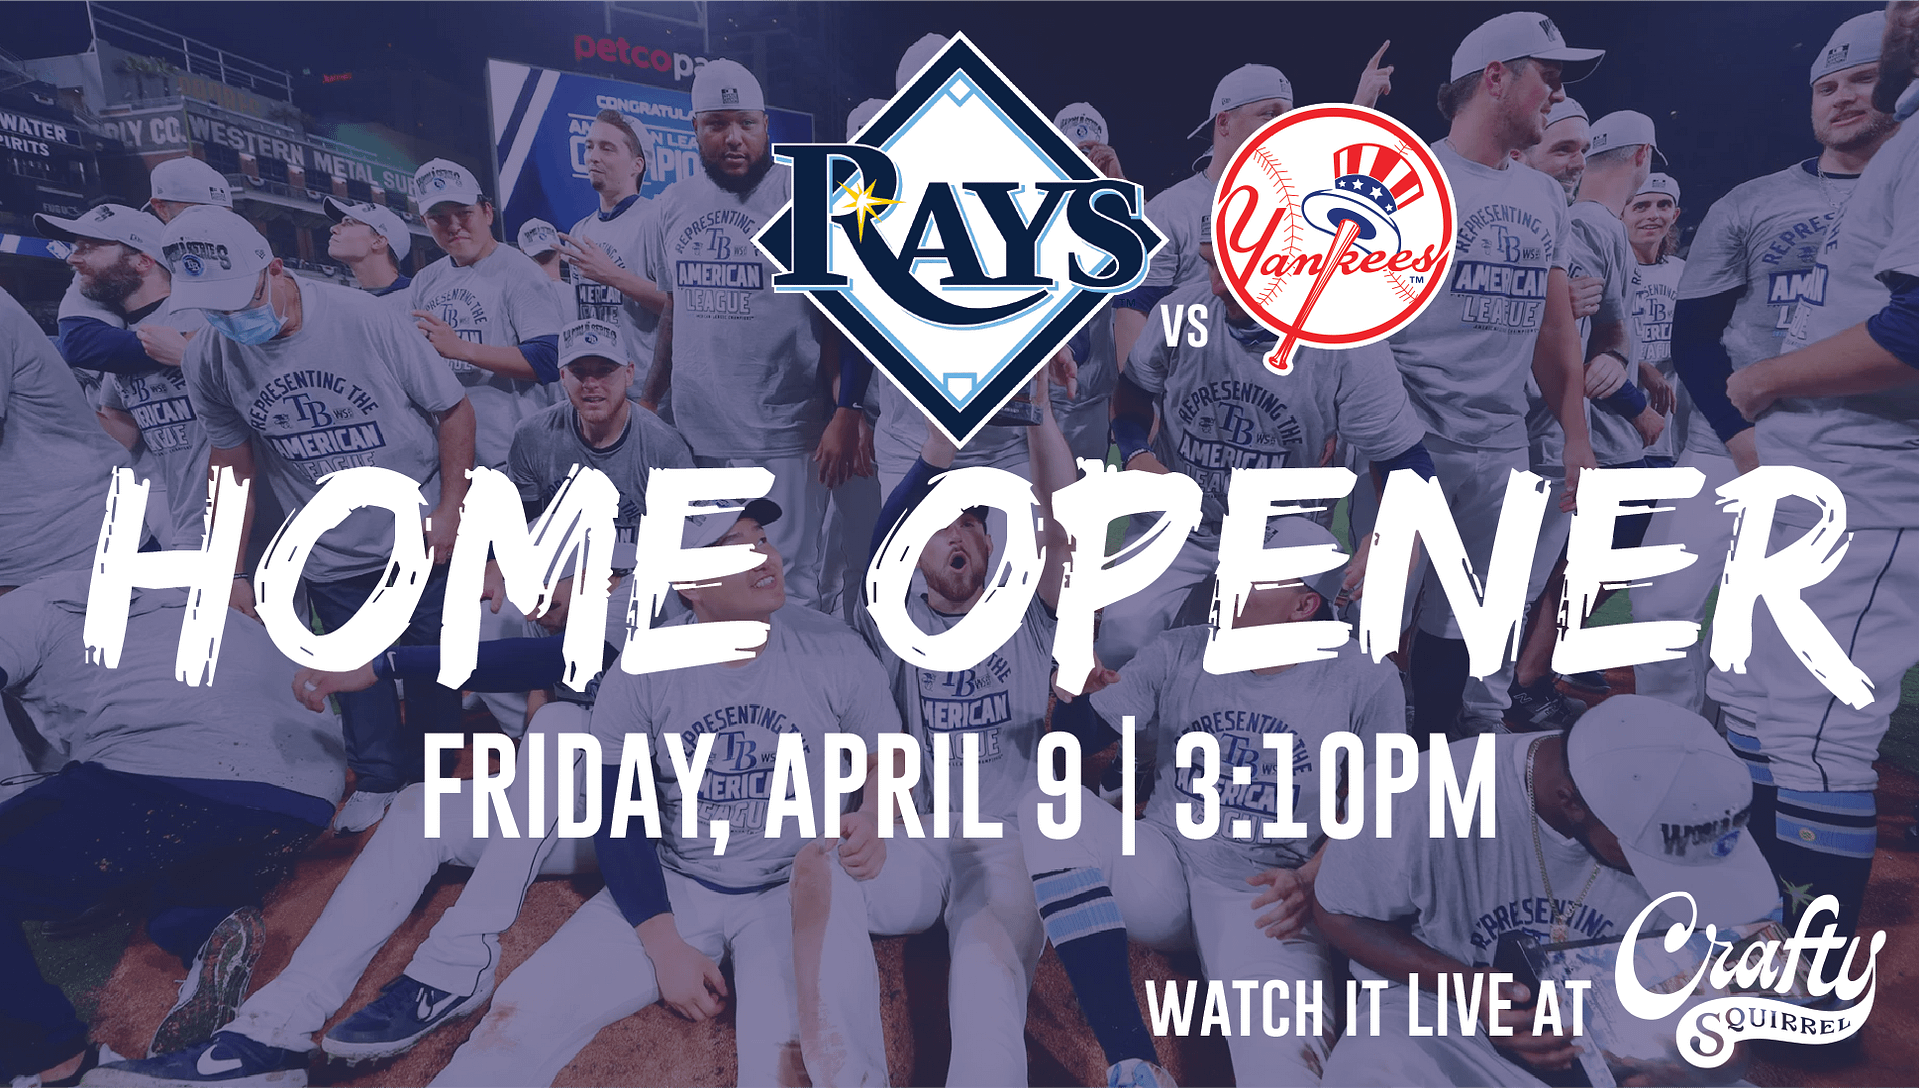 Rays Home Opener Watch Party at the Crafty Squirrel!